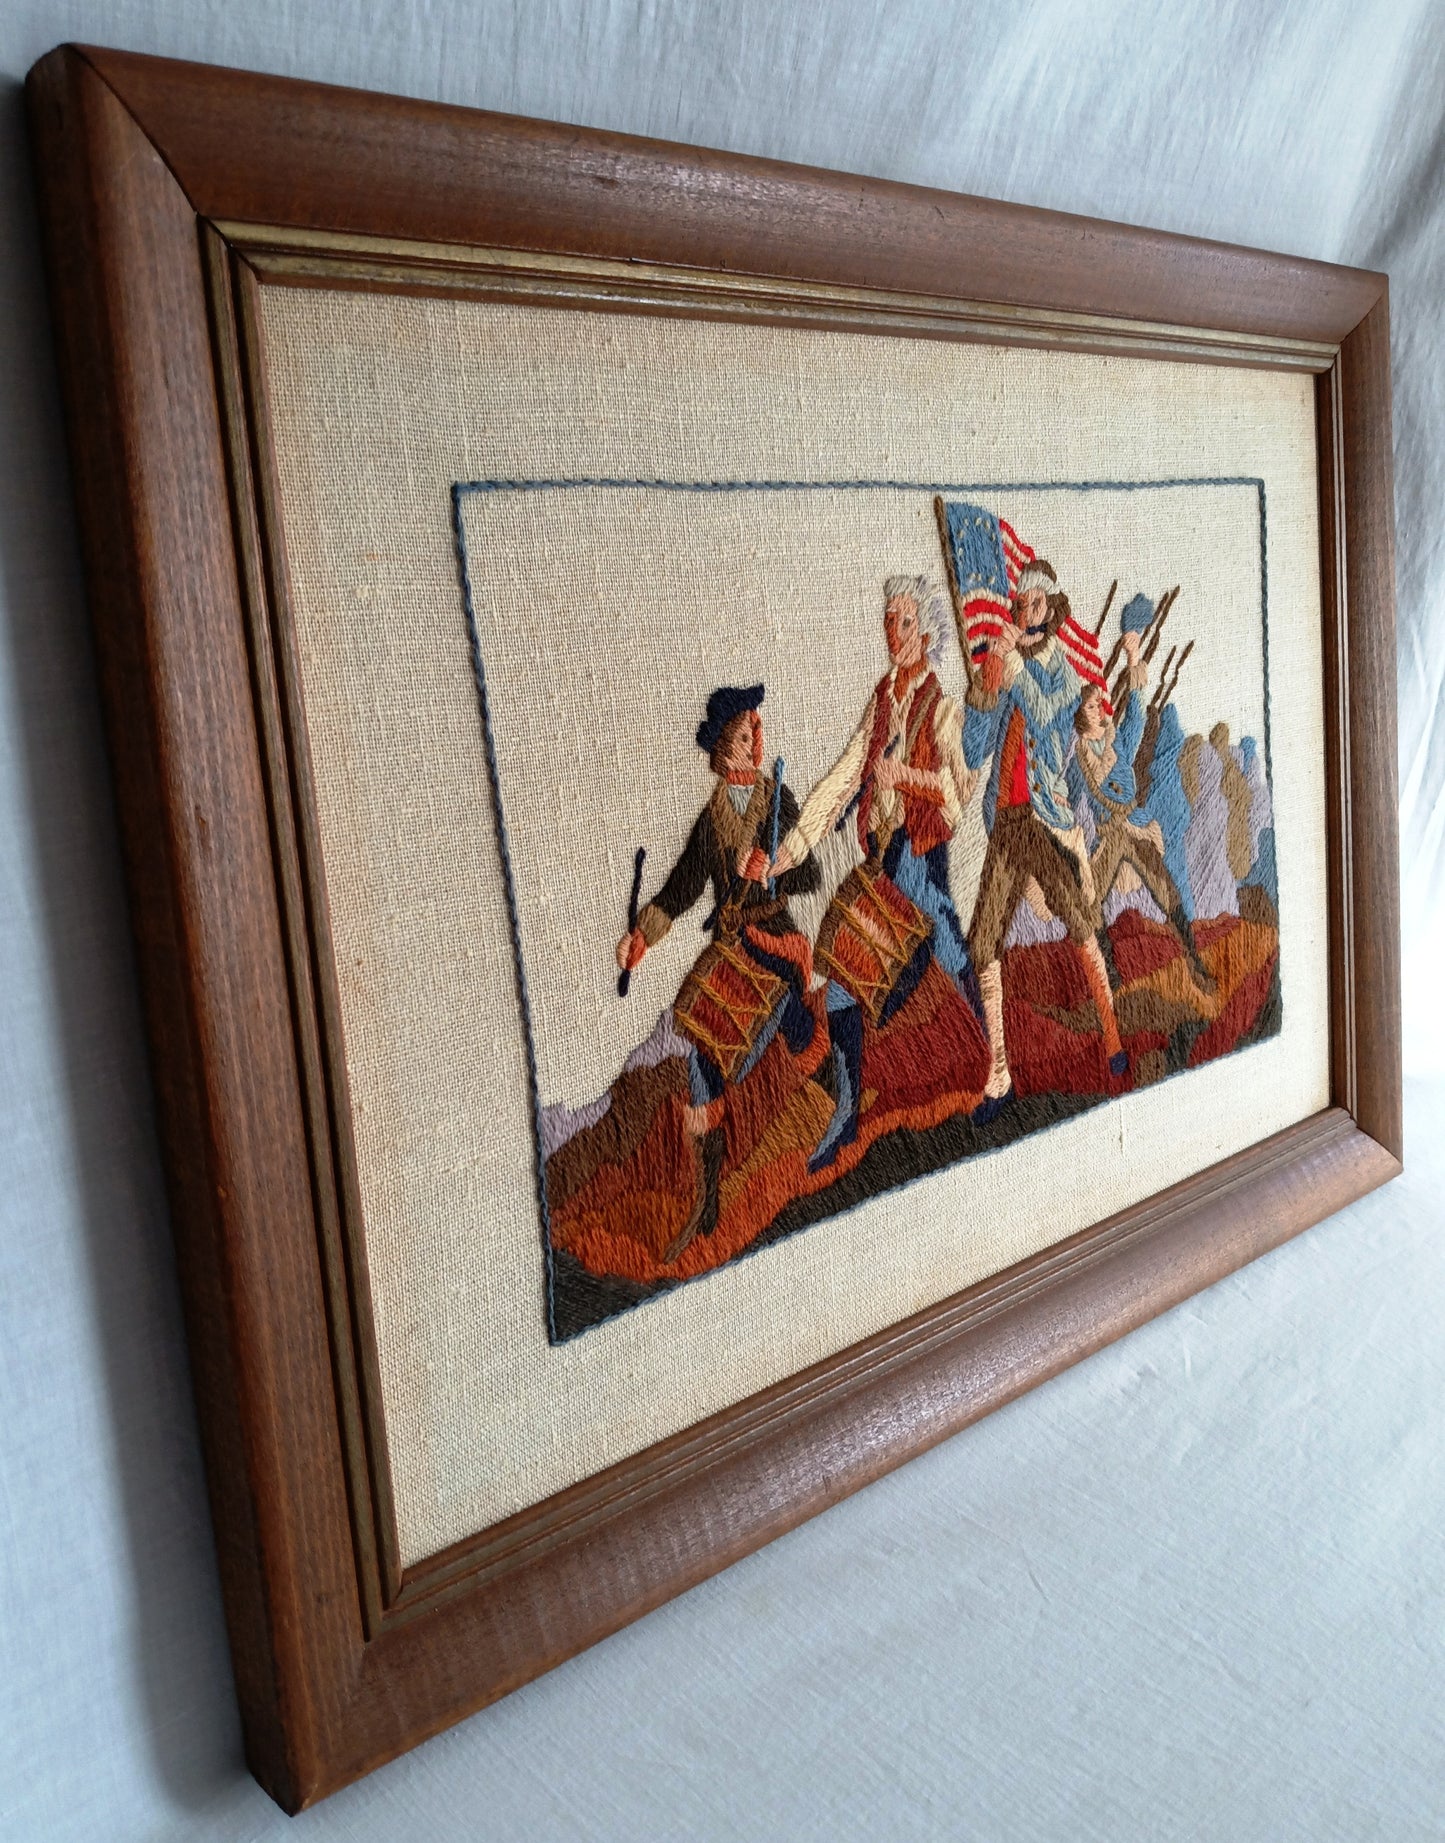 Vintage Americana Wall Art Framed Hand Embroidered The Spirit of 76-Yankee Doodle-War of 1812 Crewel Wool Linen Patriotic Wall Hanging